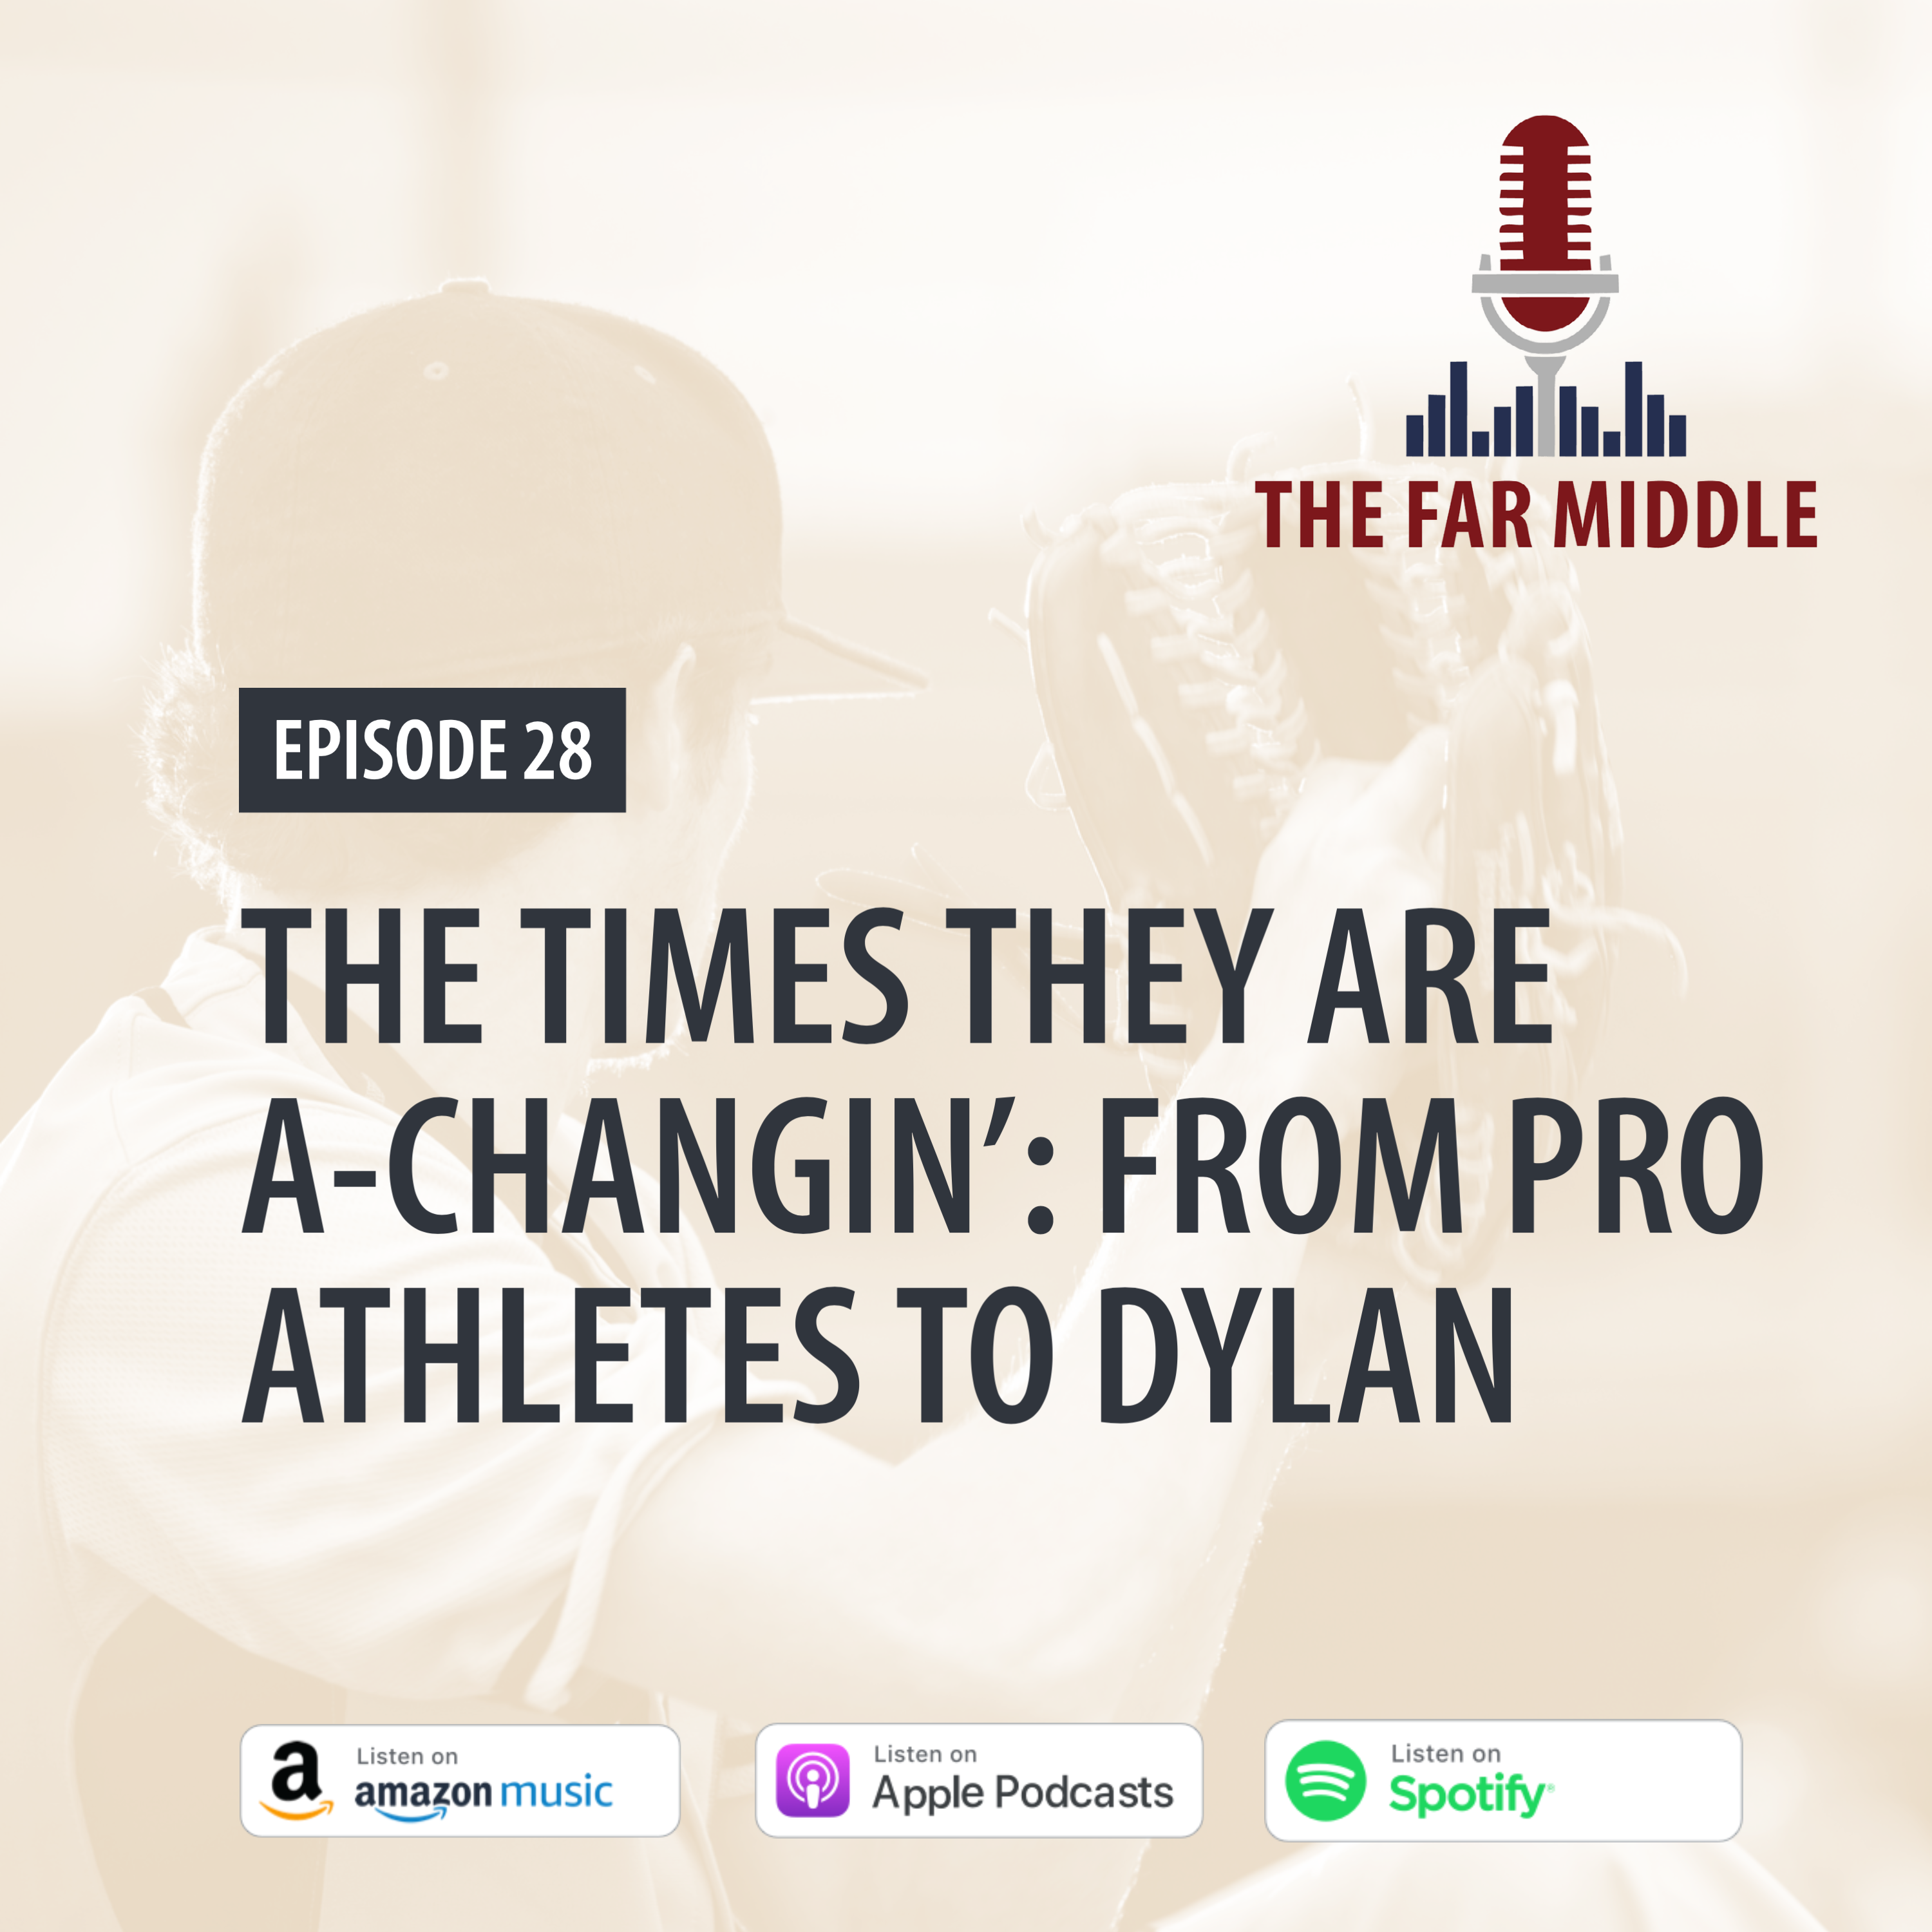 The Times They Are A-Changin’: From Pro Athletes to Dylan